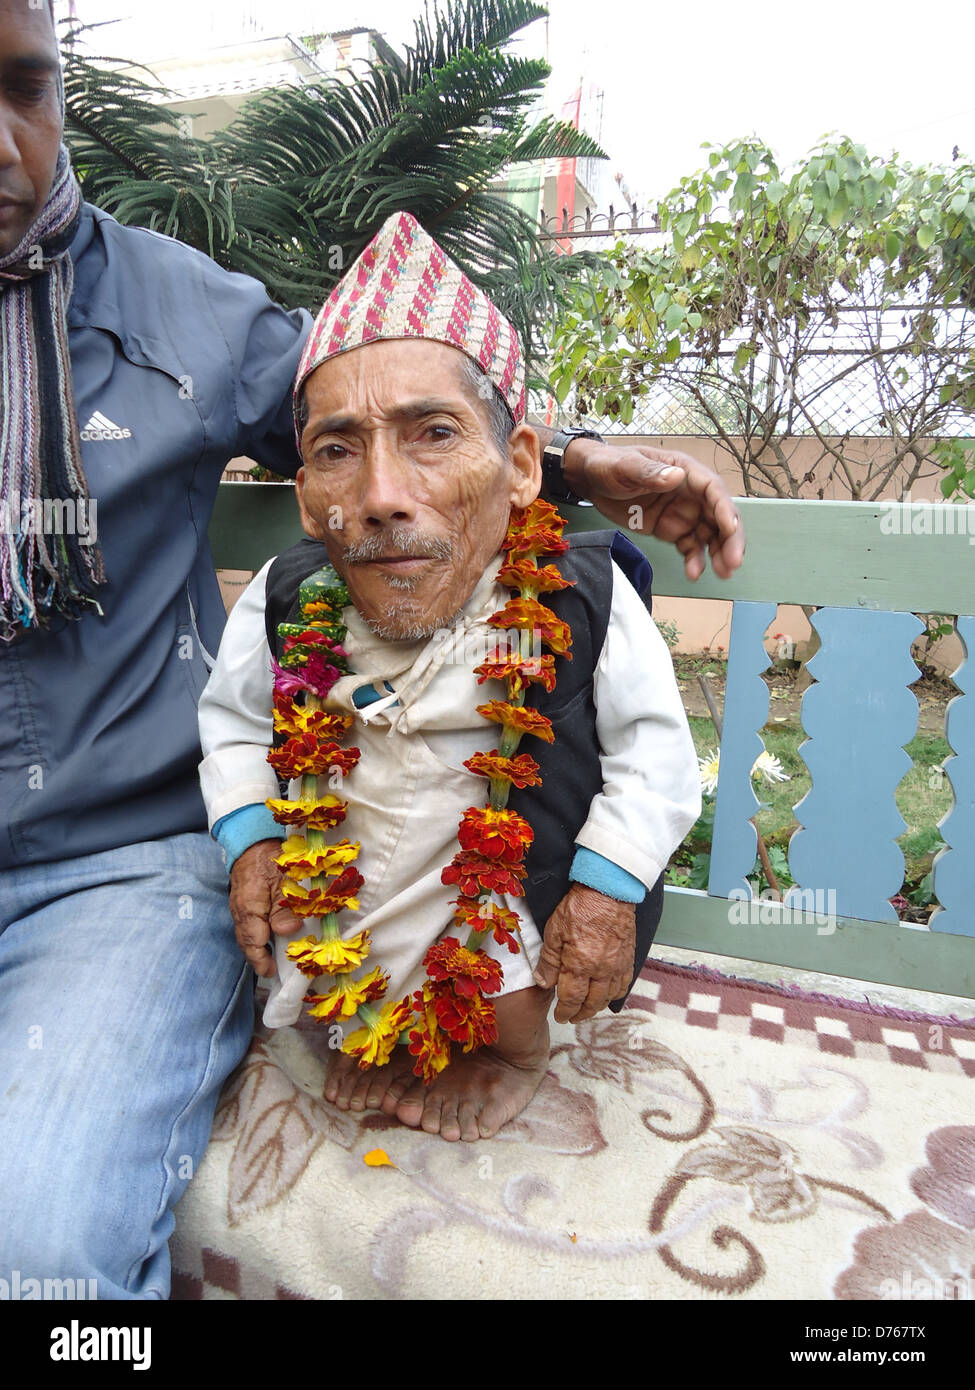 Odds Shorten For New Worlds Smallest Man A 72 Year Old Nepali Has Made 